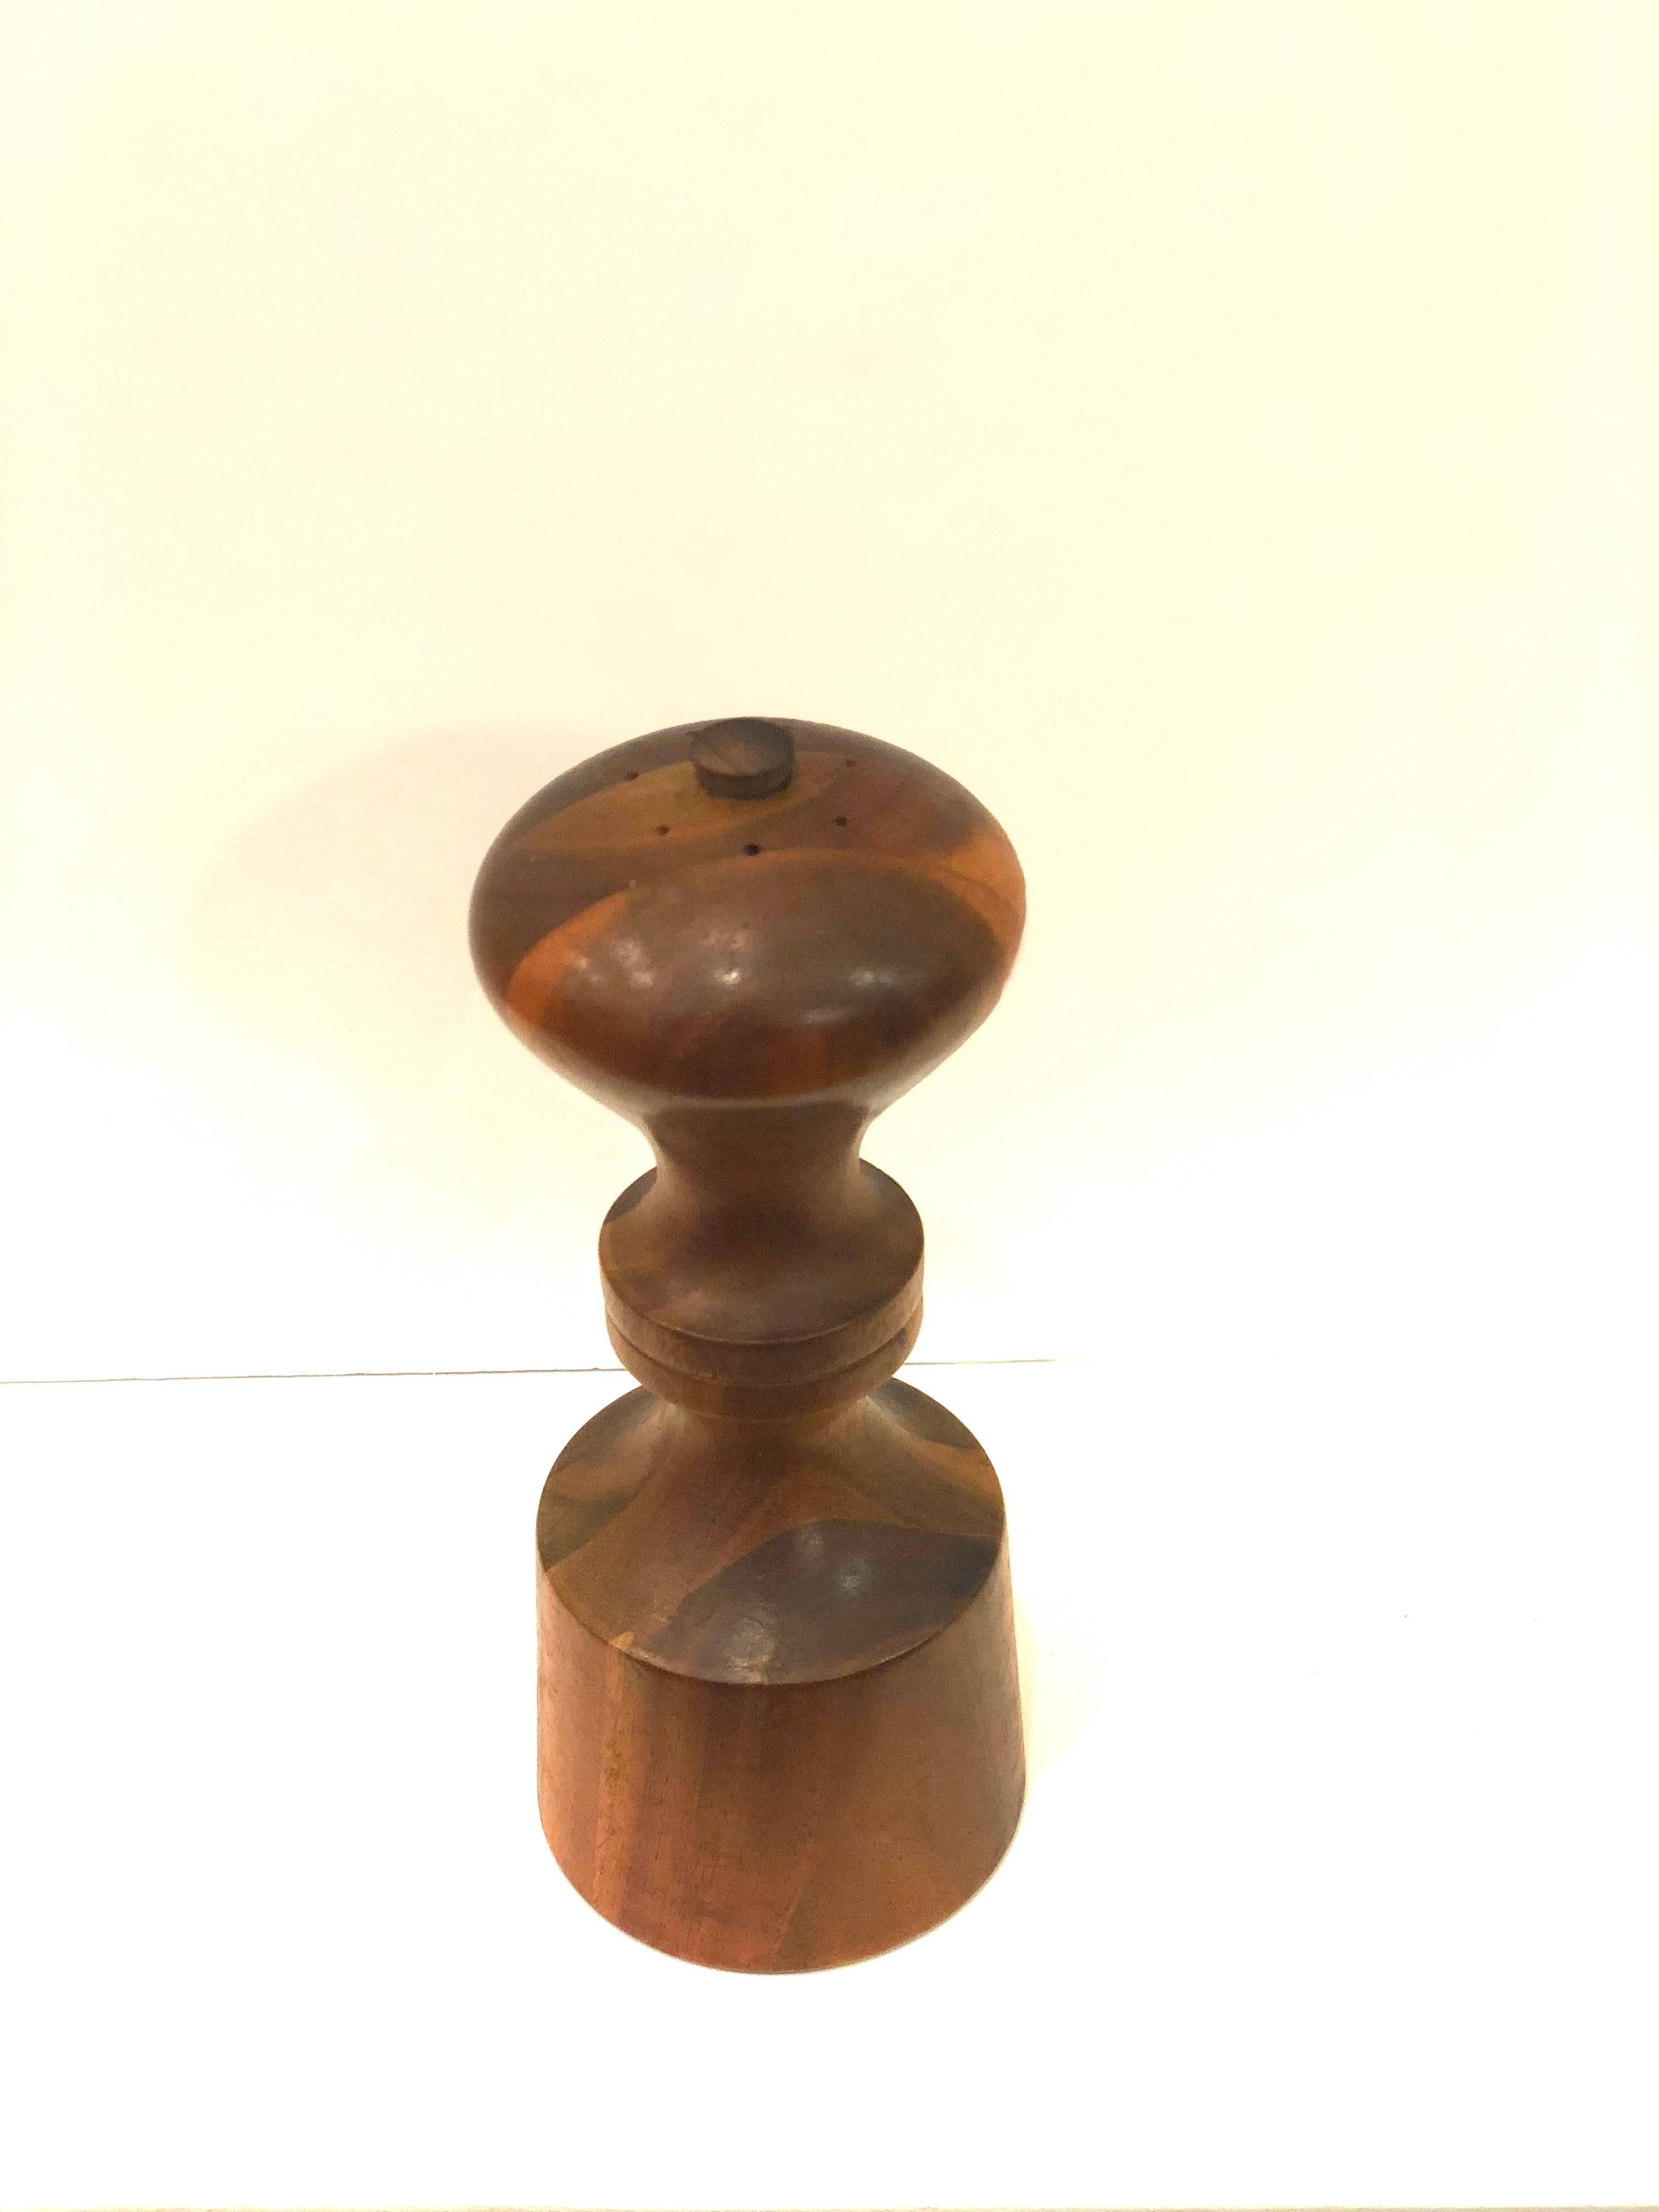 Early production and rare woods, on this salt and peppermill designed by Quistgaard for Dansk, beautiful design. I believe its in cheerywood with the early ducks stamped never seen this one.